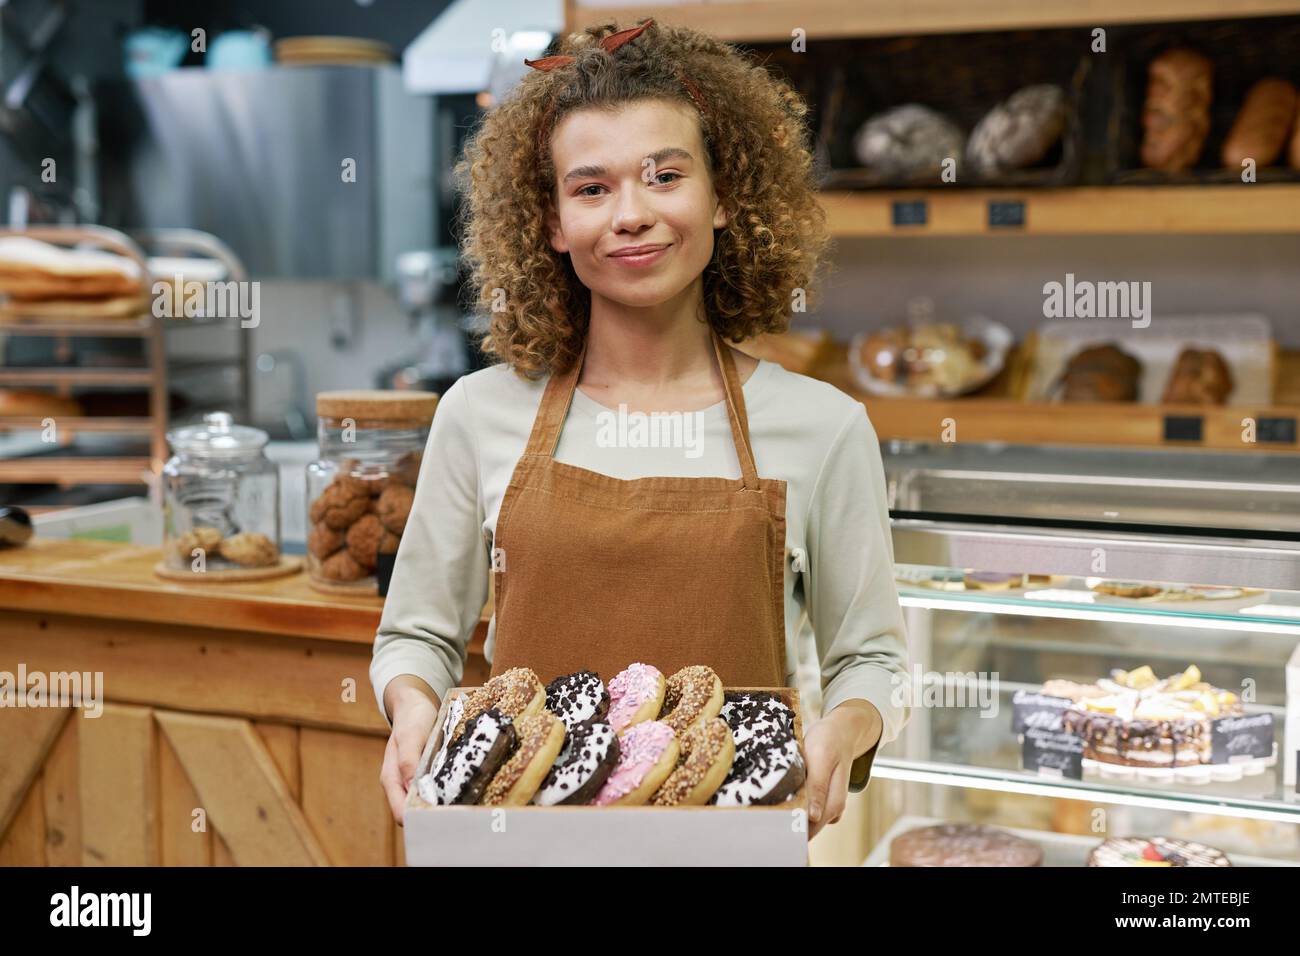 Portrait of cheerful young bakery owner holding tray of fresh glazed donuts Stock Photo